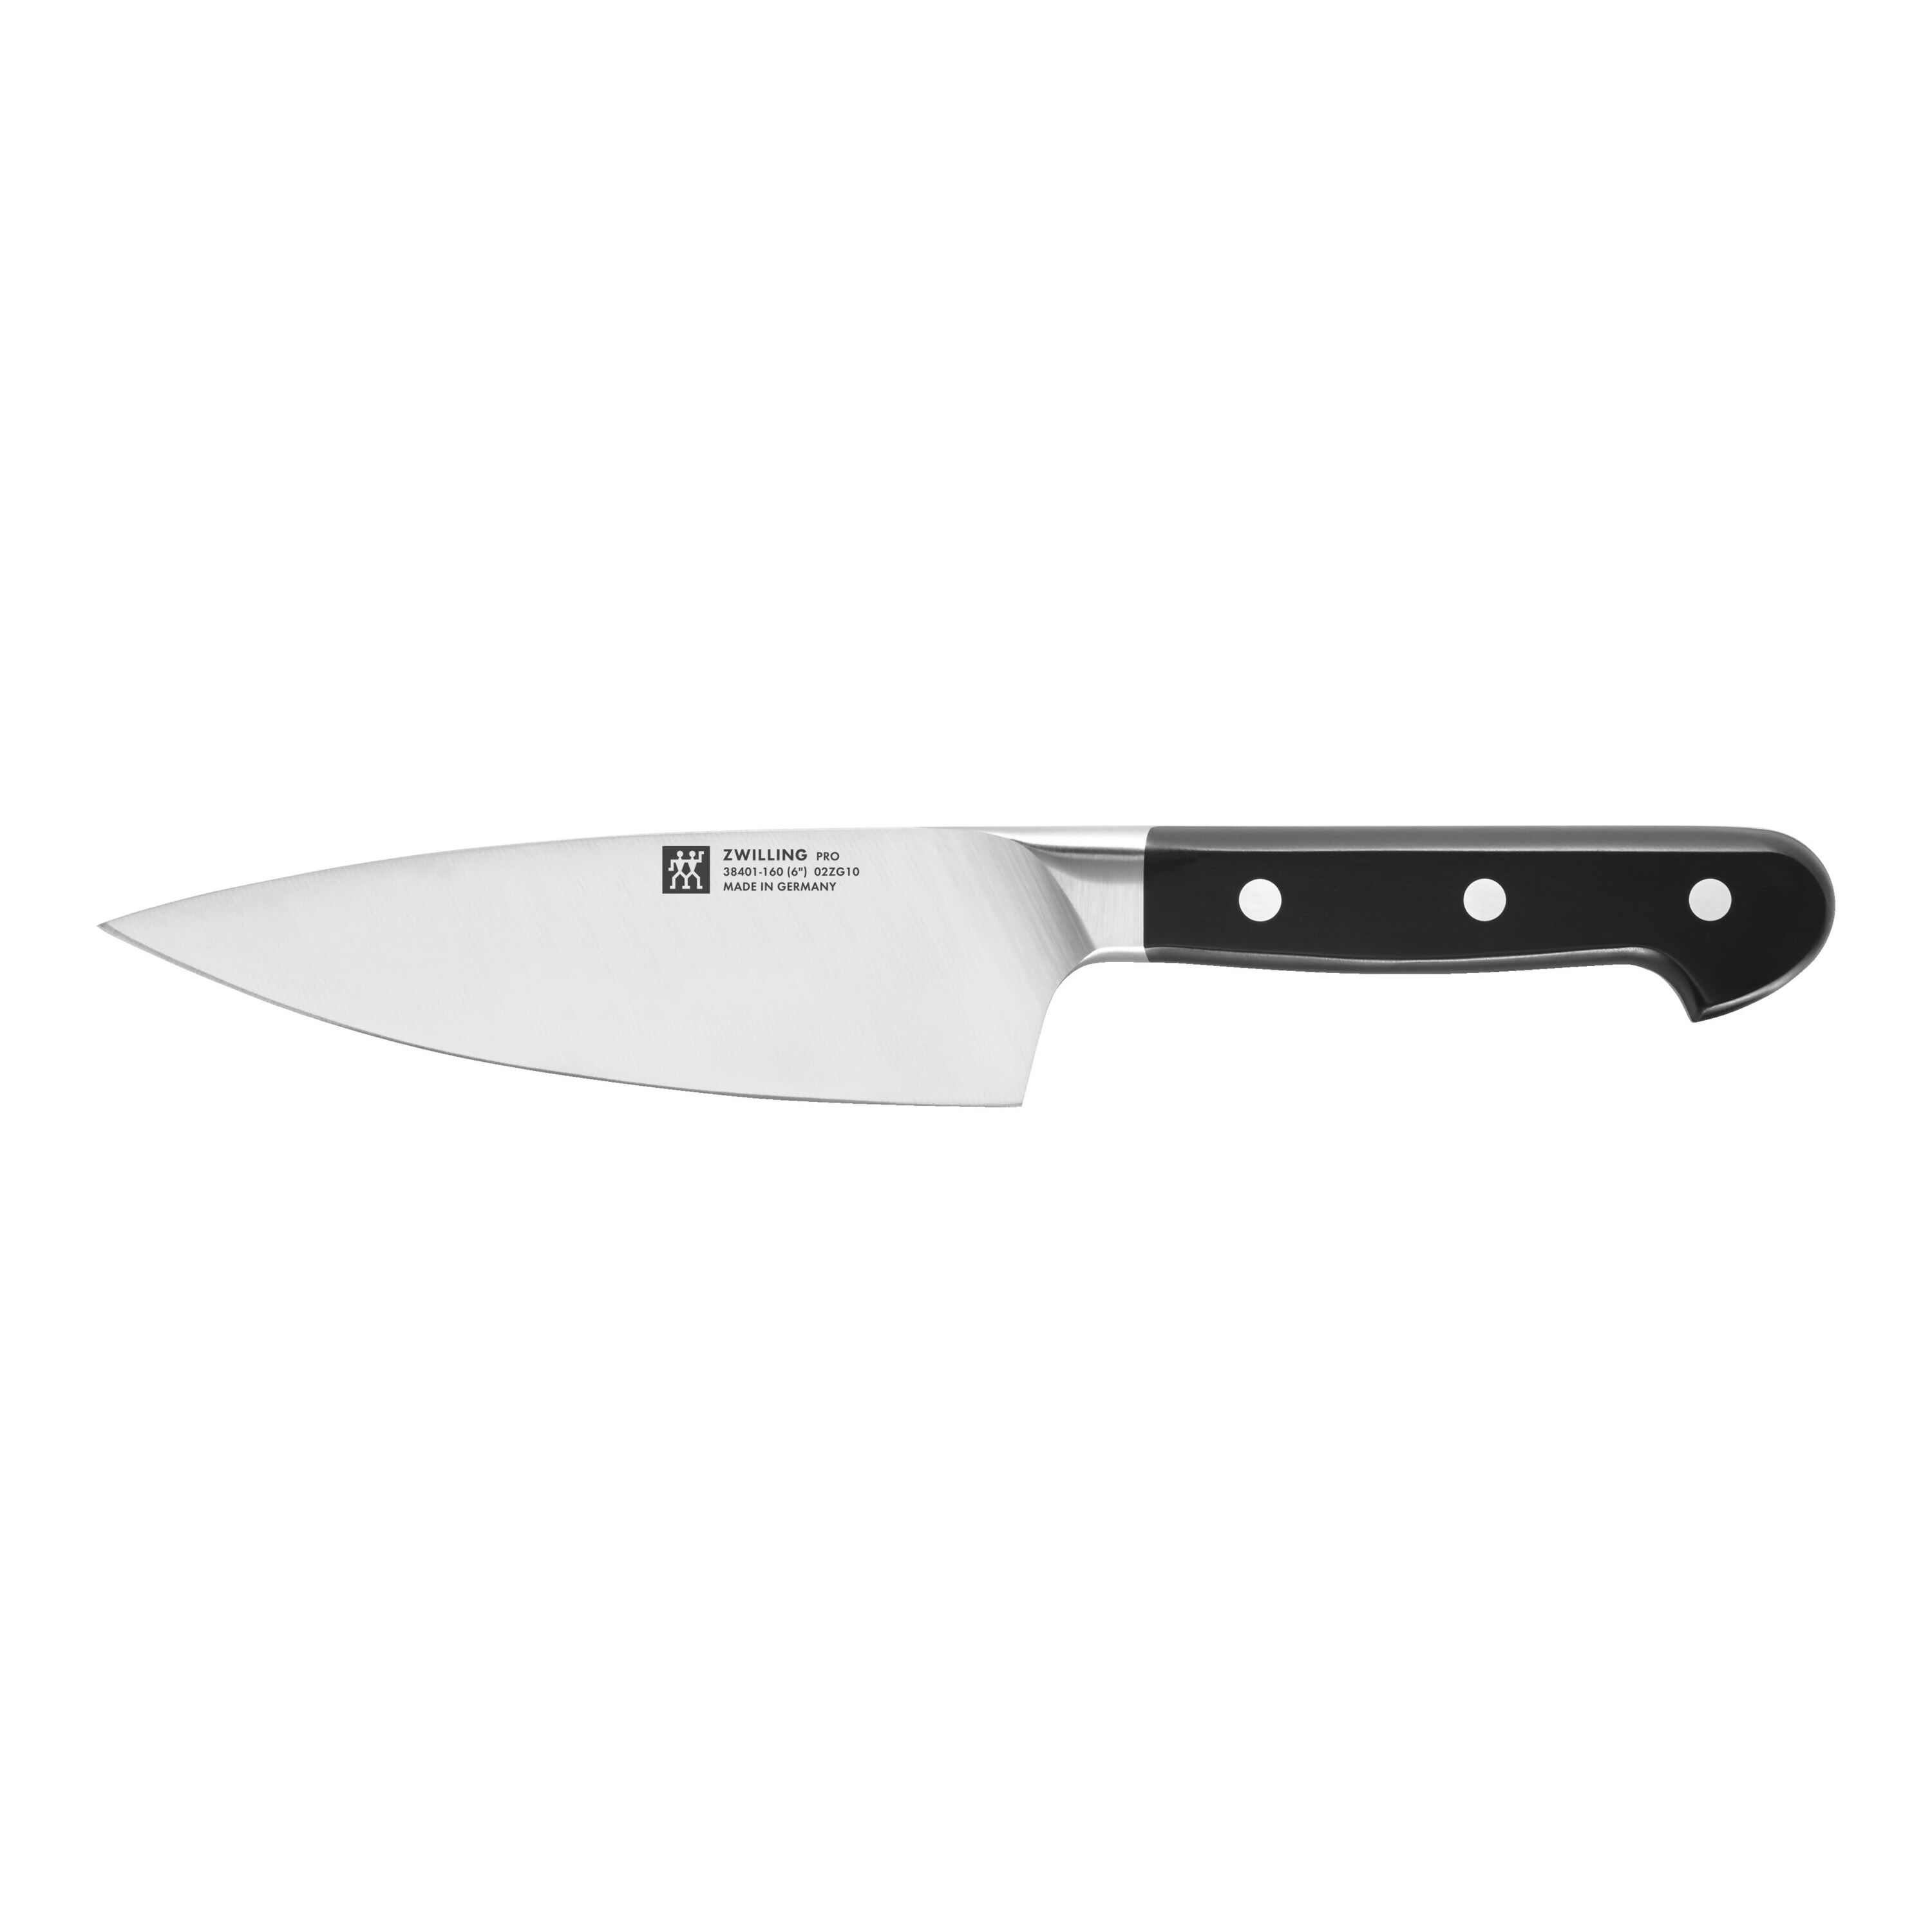 Buy ZWILLING Pro Chef's knife | ZWILLING.COM